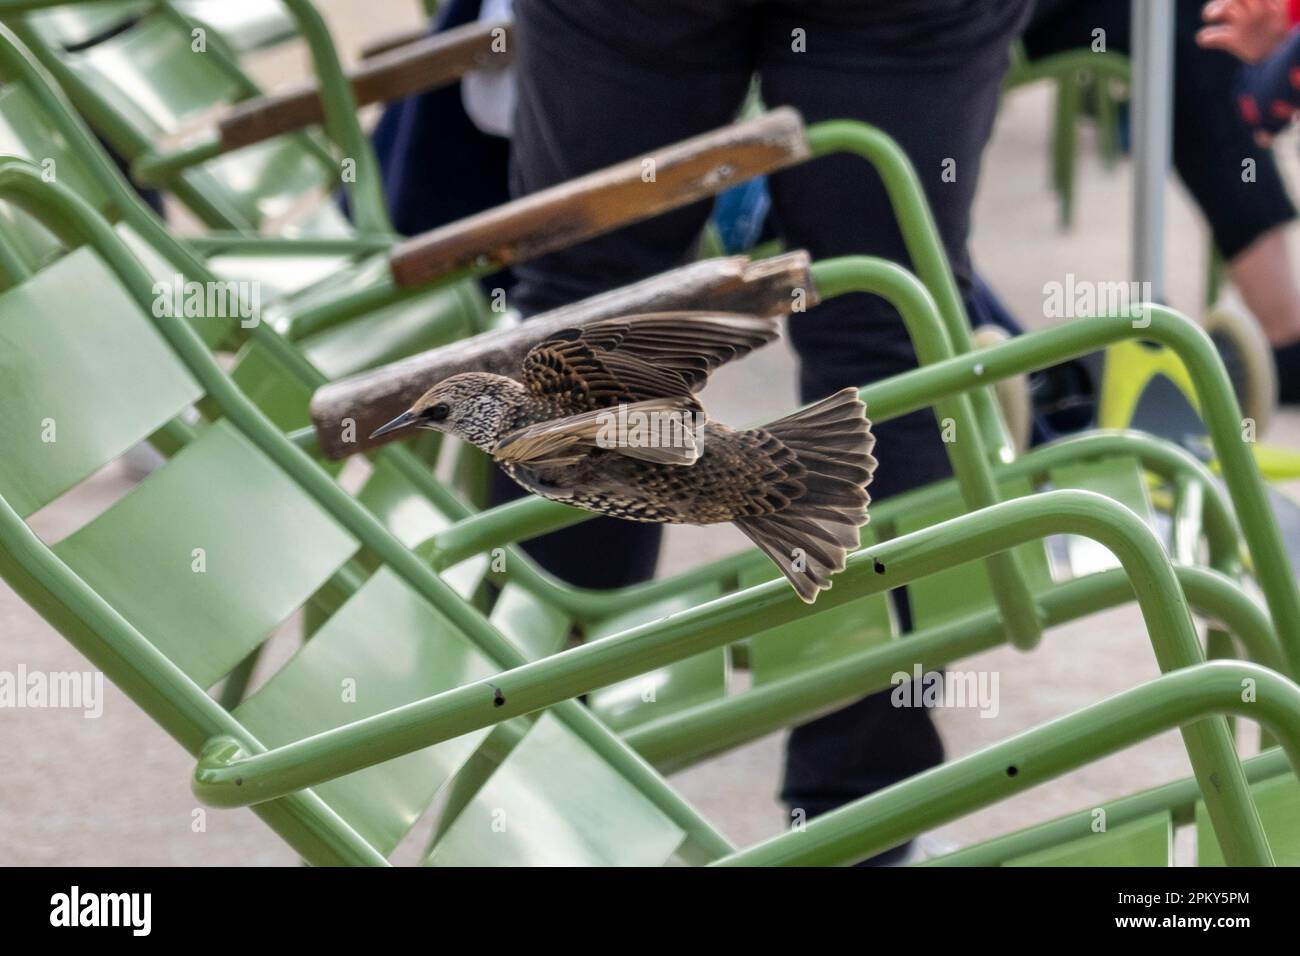 Zoomed Photo of European Starling Bird Soaring Low with Green Chairs in the Background Stock Photo